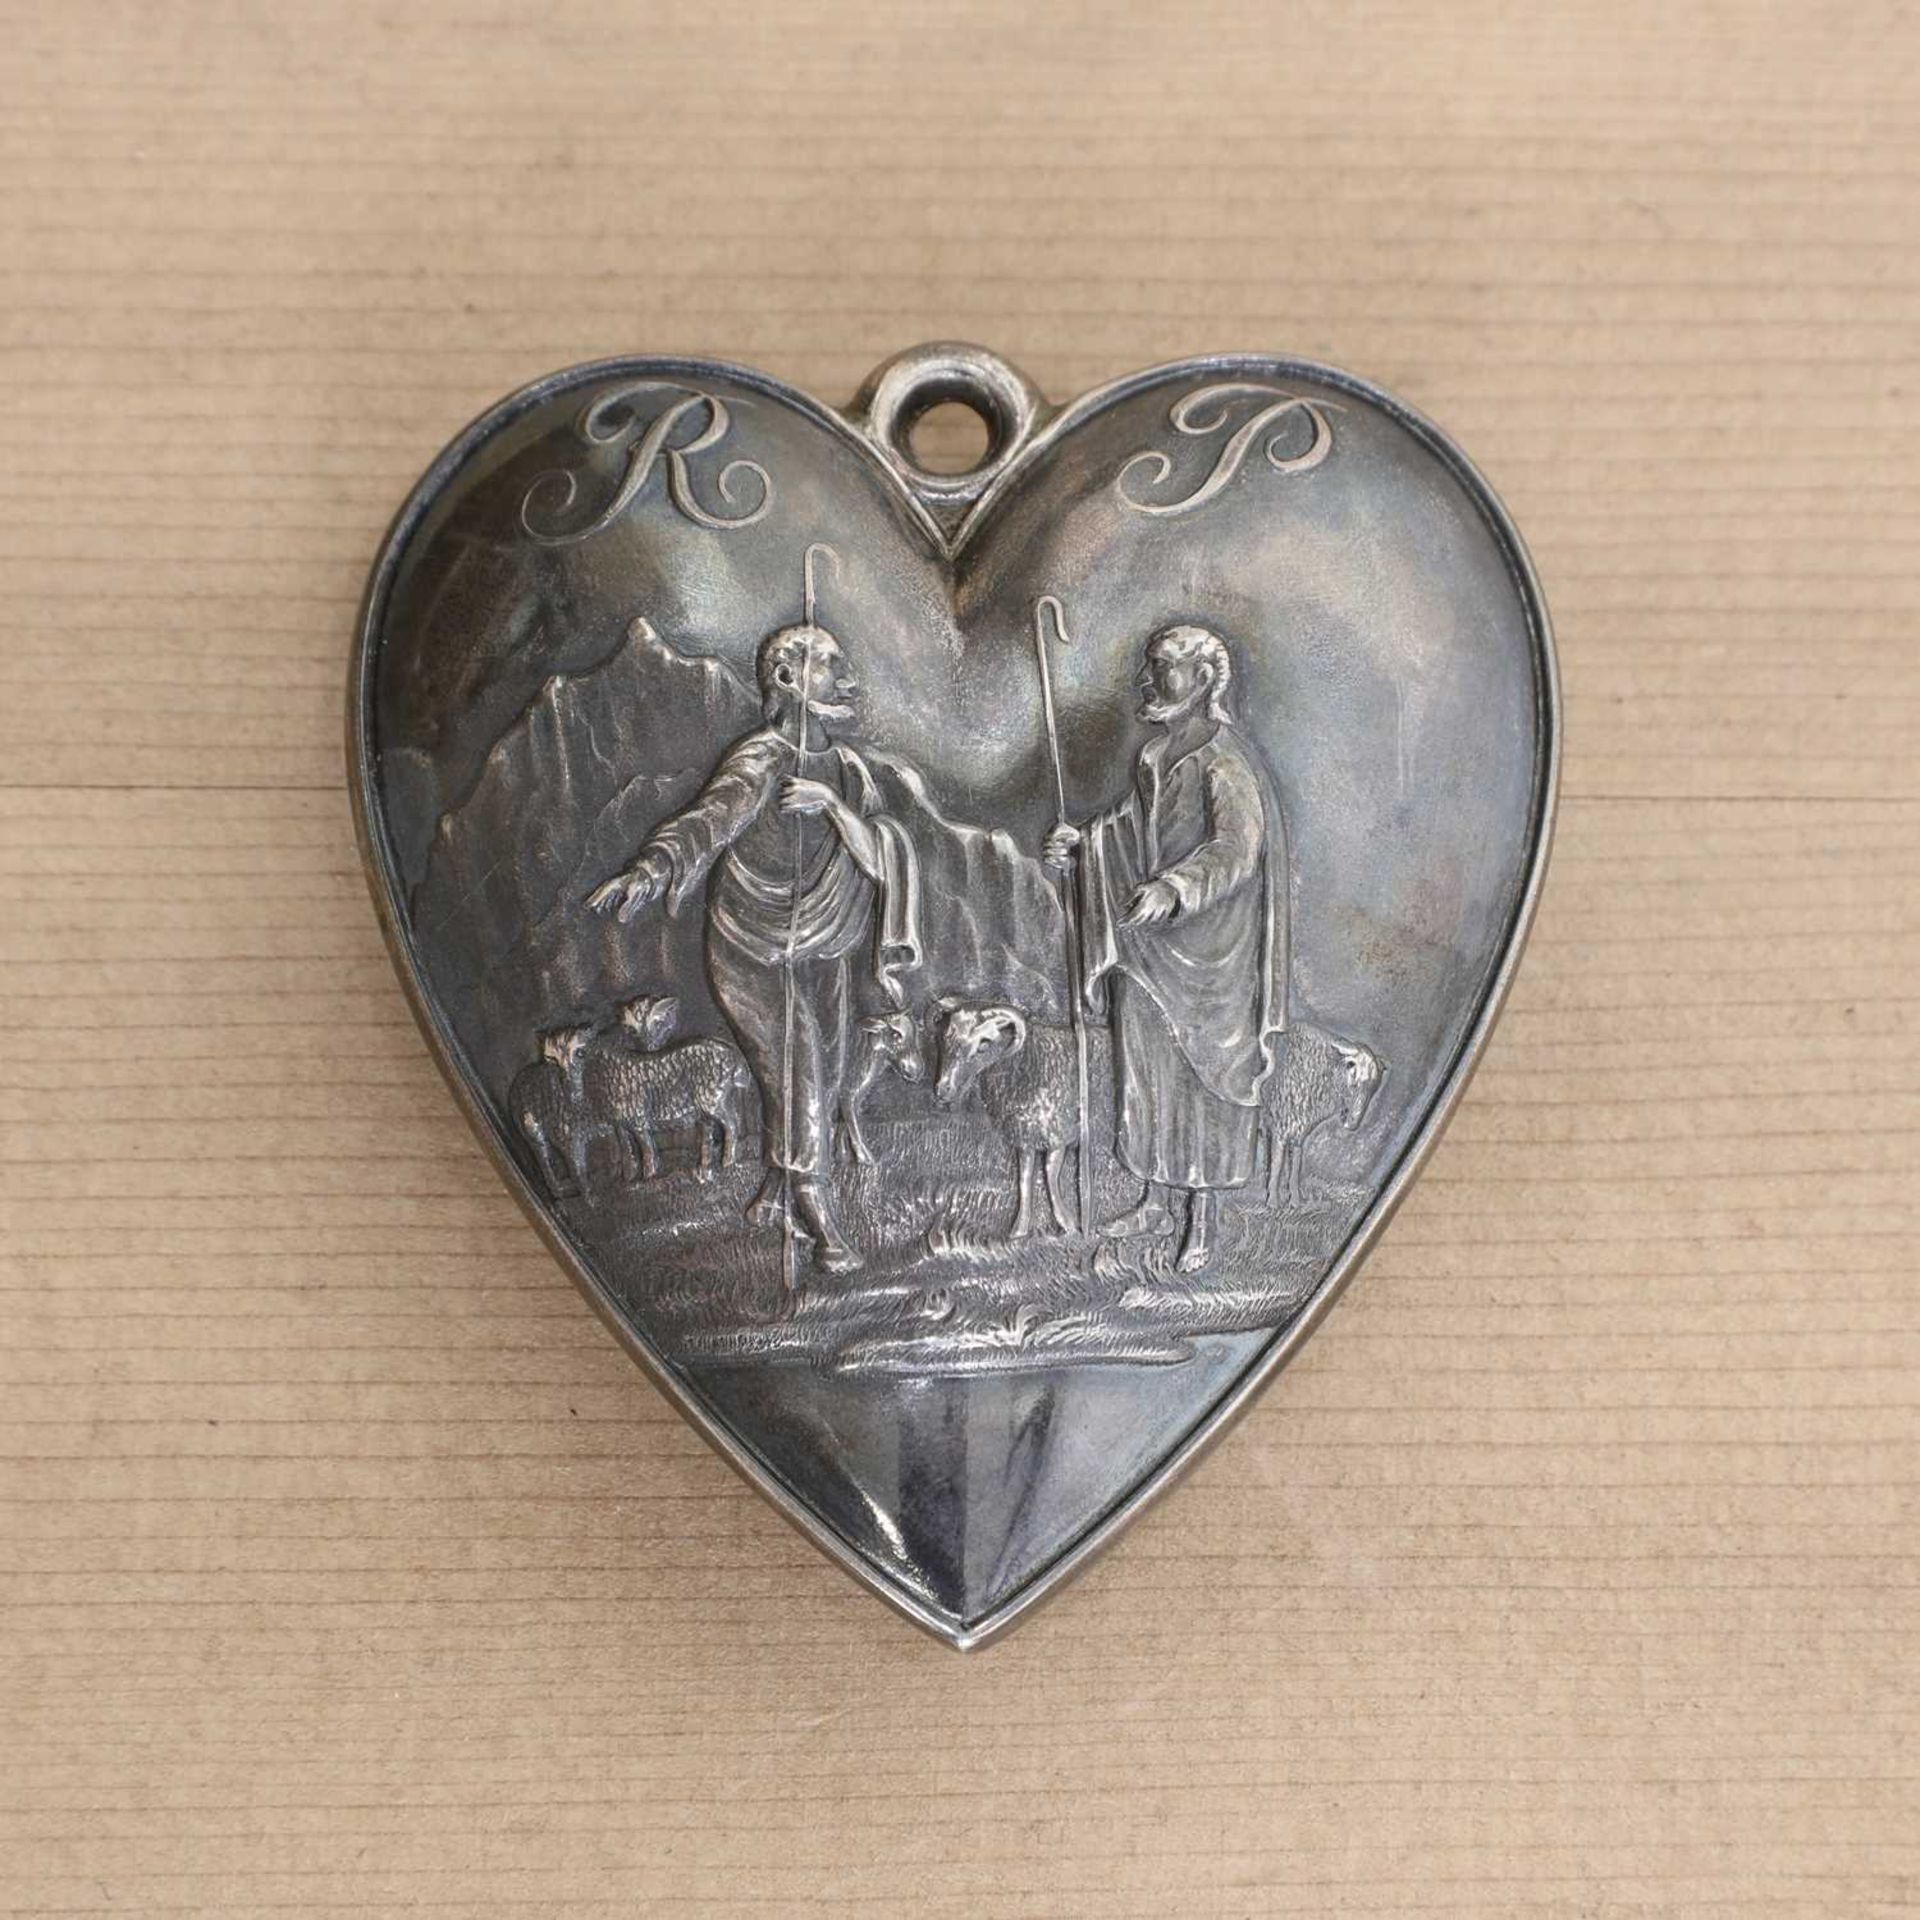 A large George IV silver heart-shaped pendant, - Image 2 of 2